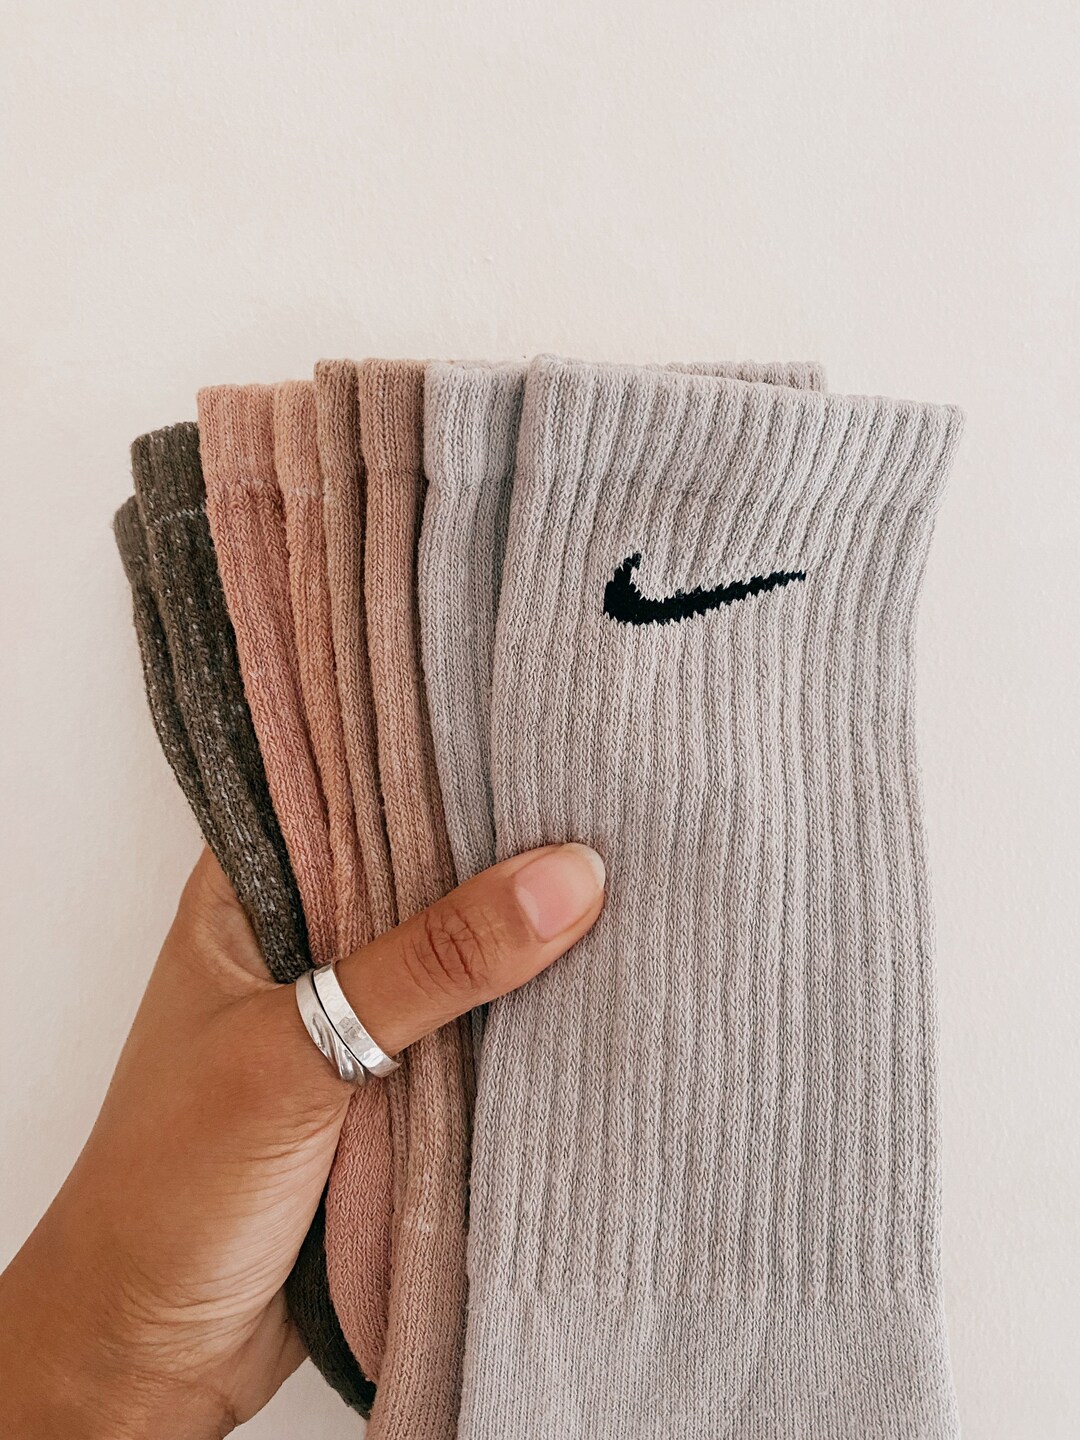 Nike Coloured Dyed Sock Neutral/nude 1 PAIR // Small Gift - Etsy UK